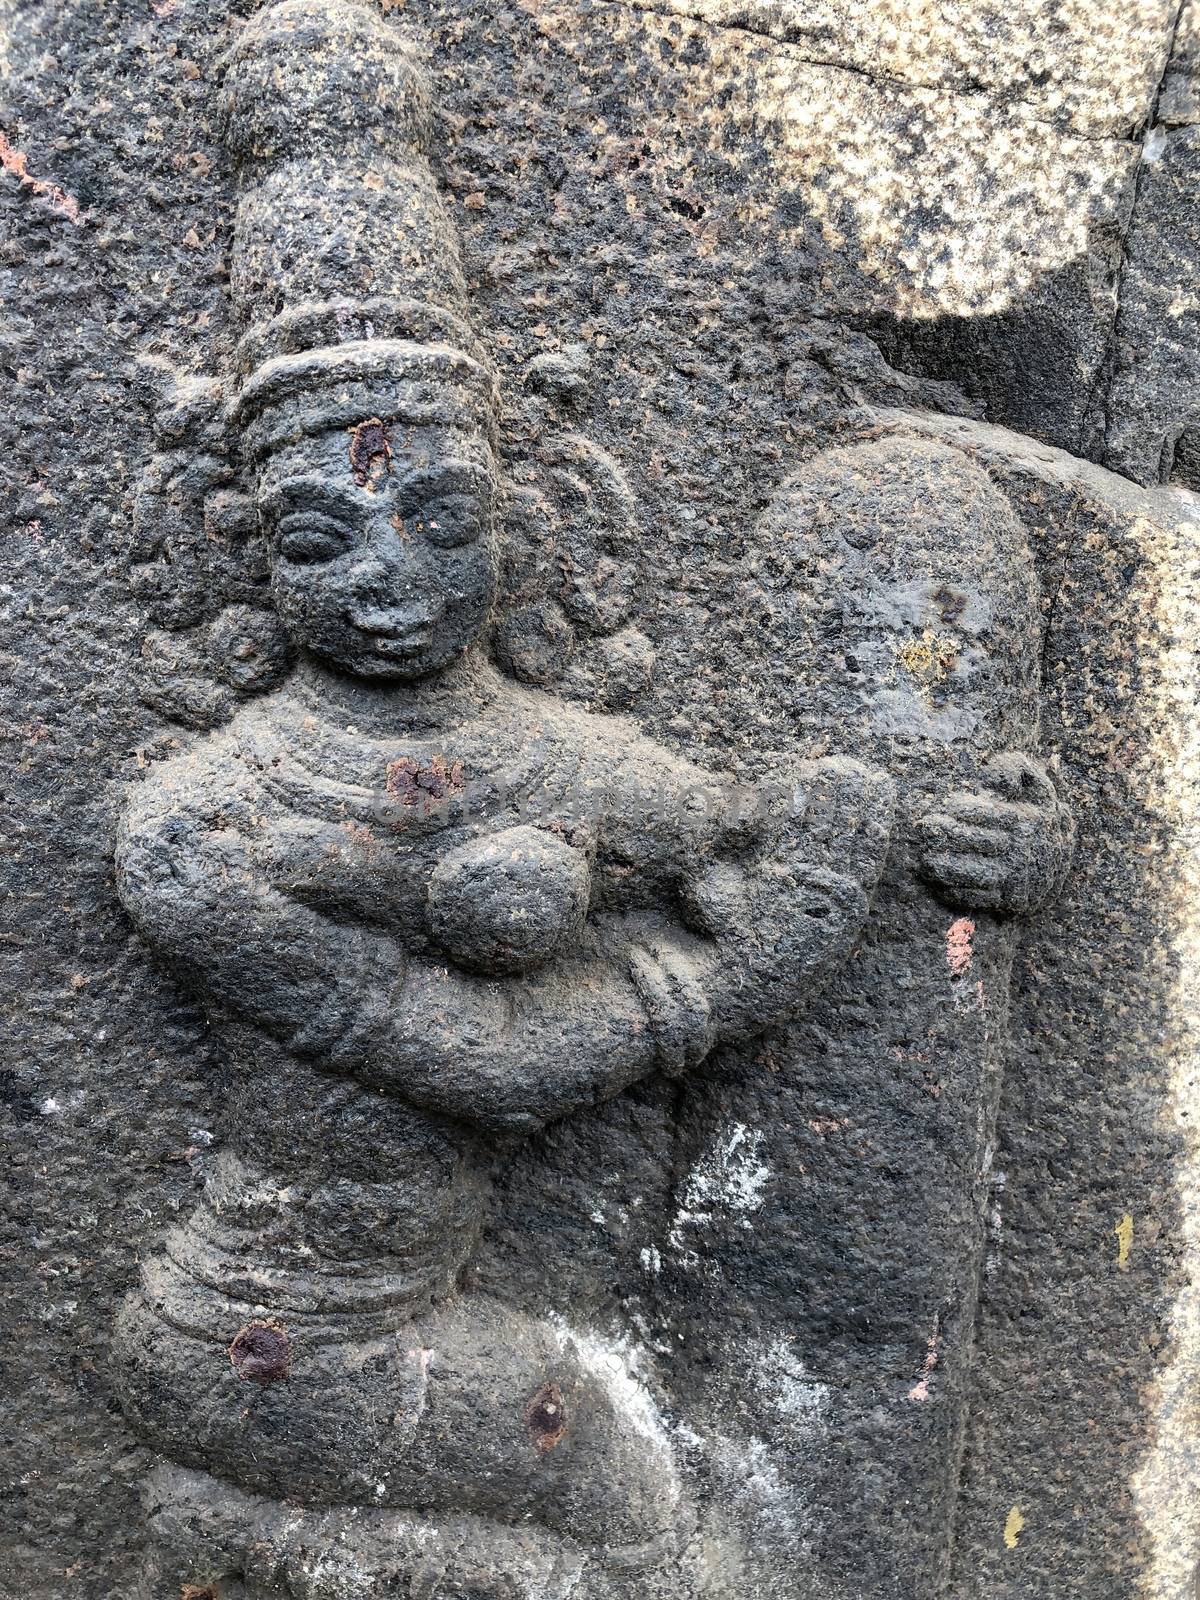 Goddess holding the Shiva Linga sculpture. Bas relief sculpture carved in the walls of Shiva temple at Tamil nadu by prabhakaran851